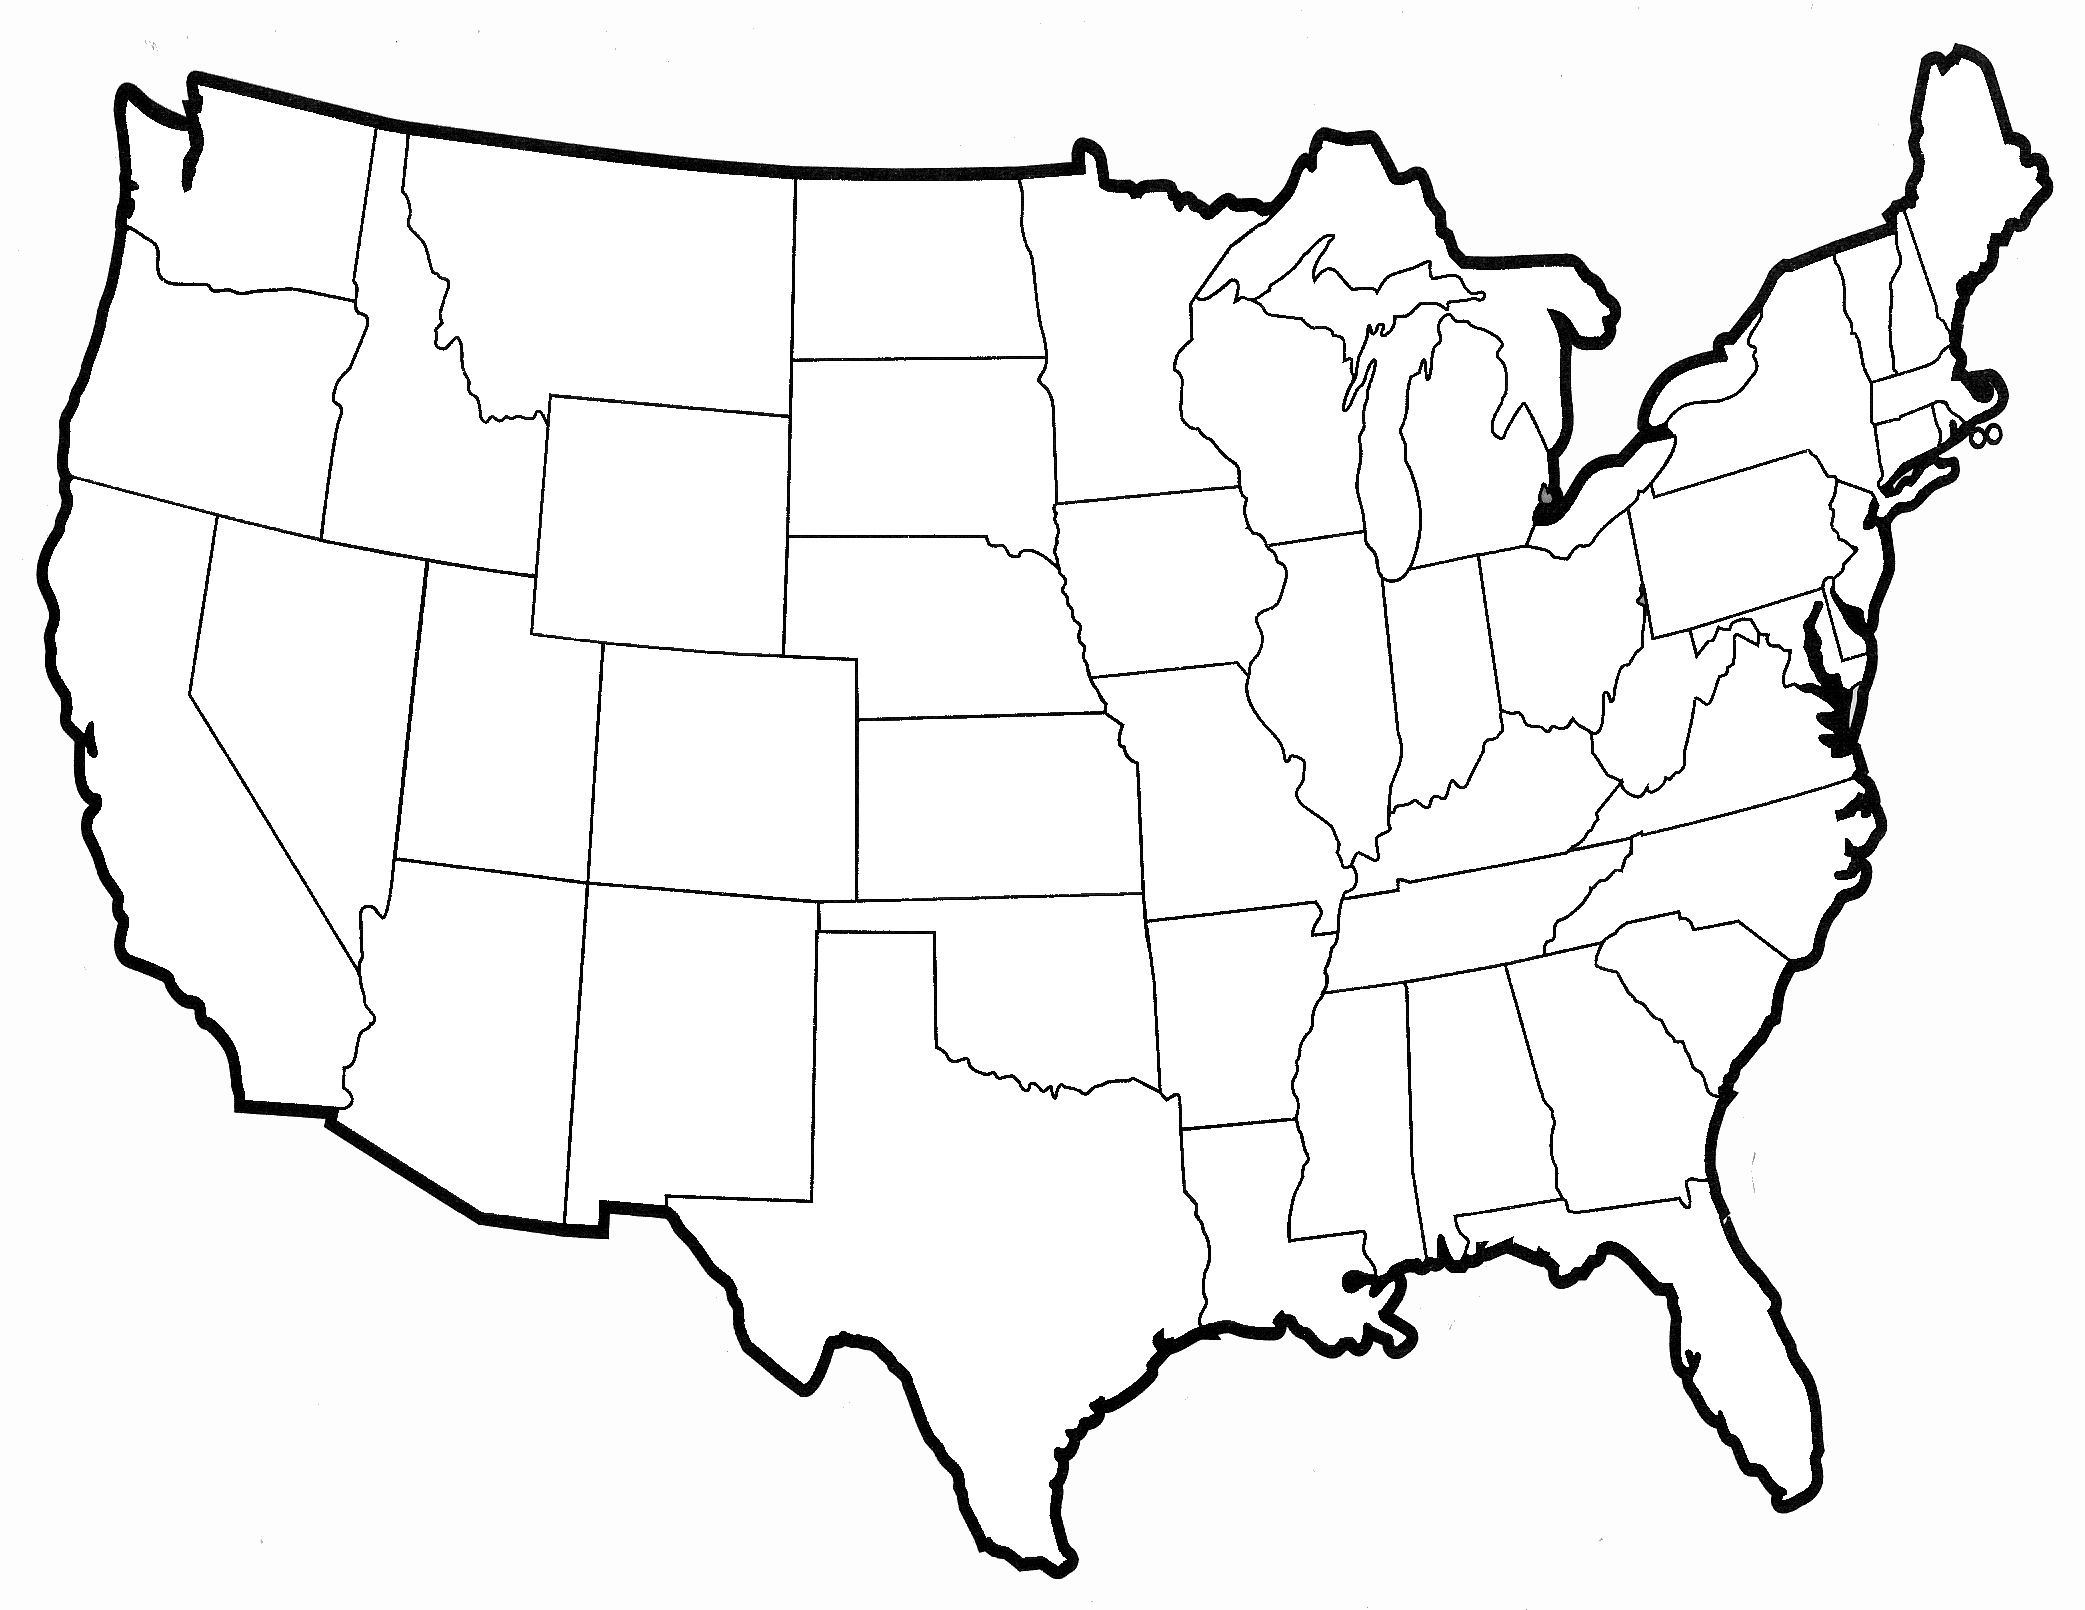 Best Photos of States Map Blank For Testing - United States Blank ...